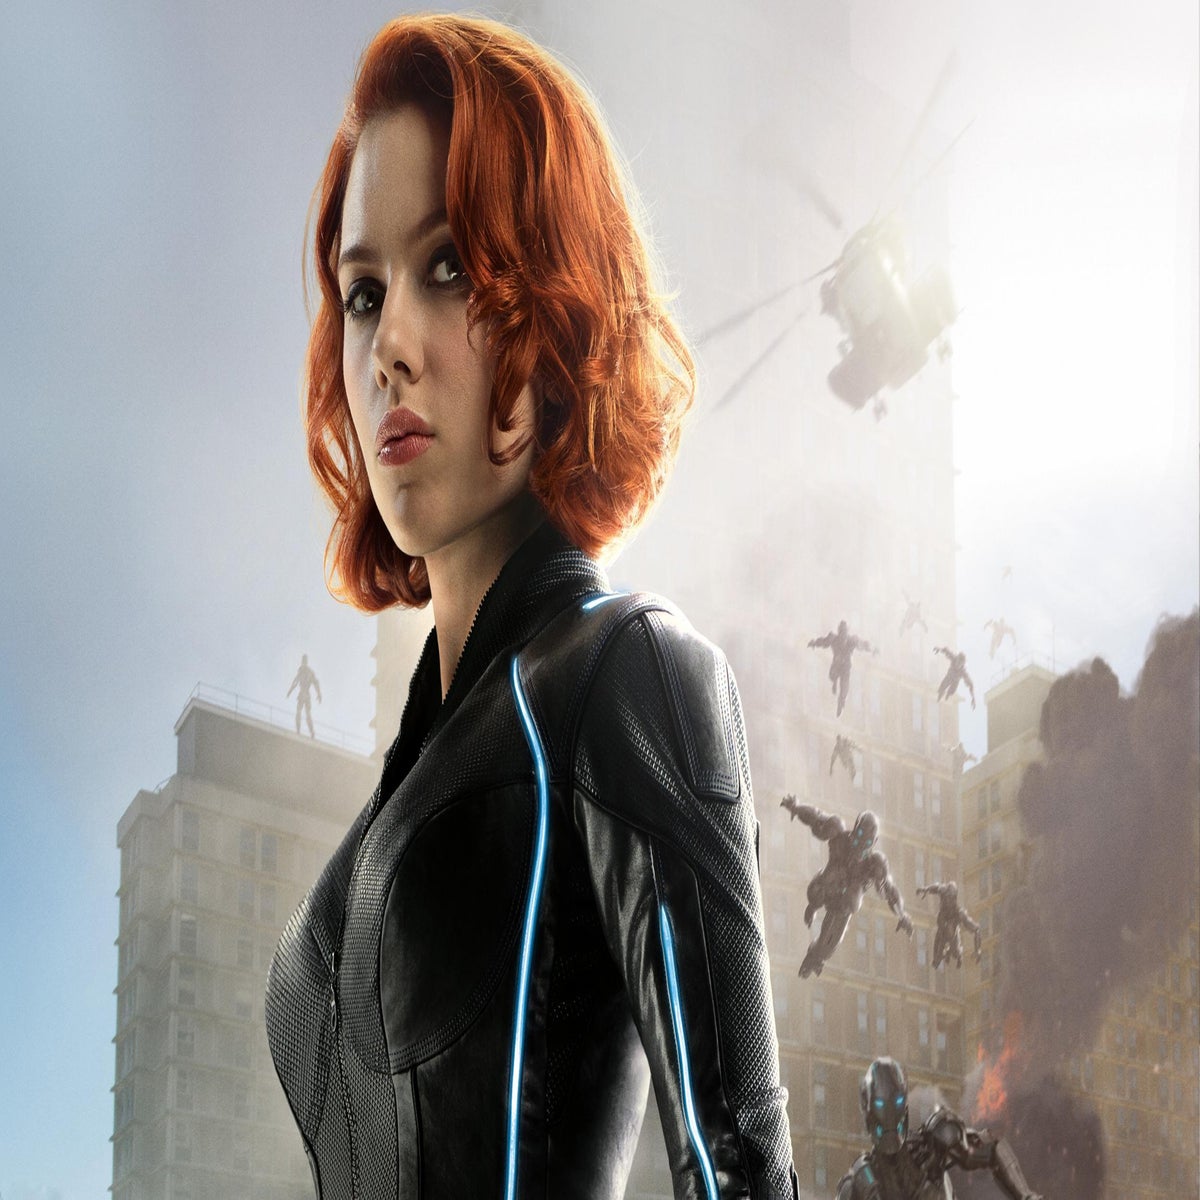 Captain America actor Chris Evans may have confirmed a Black Widow movie, The Independent